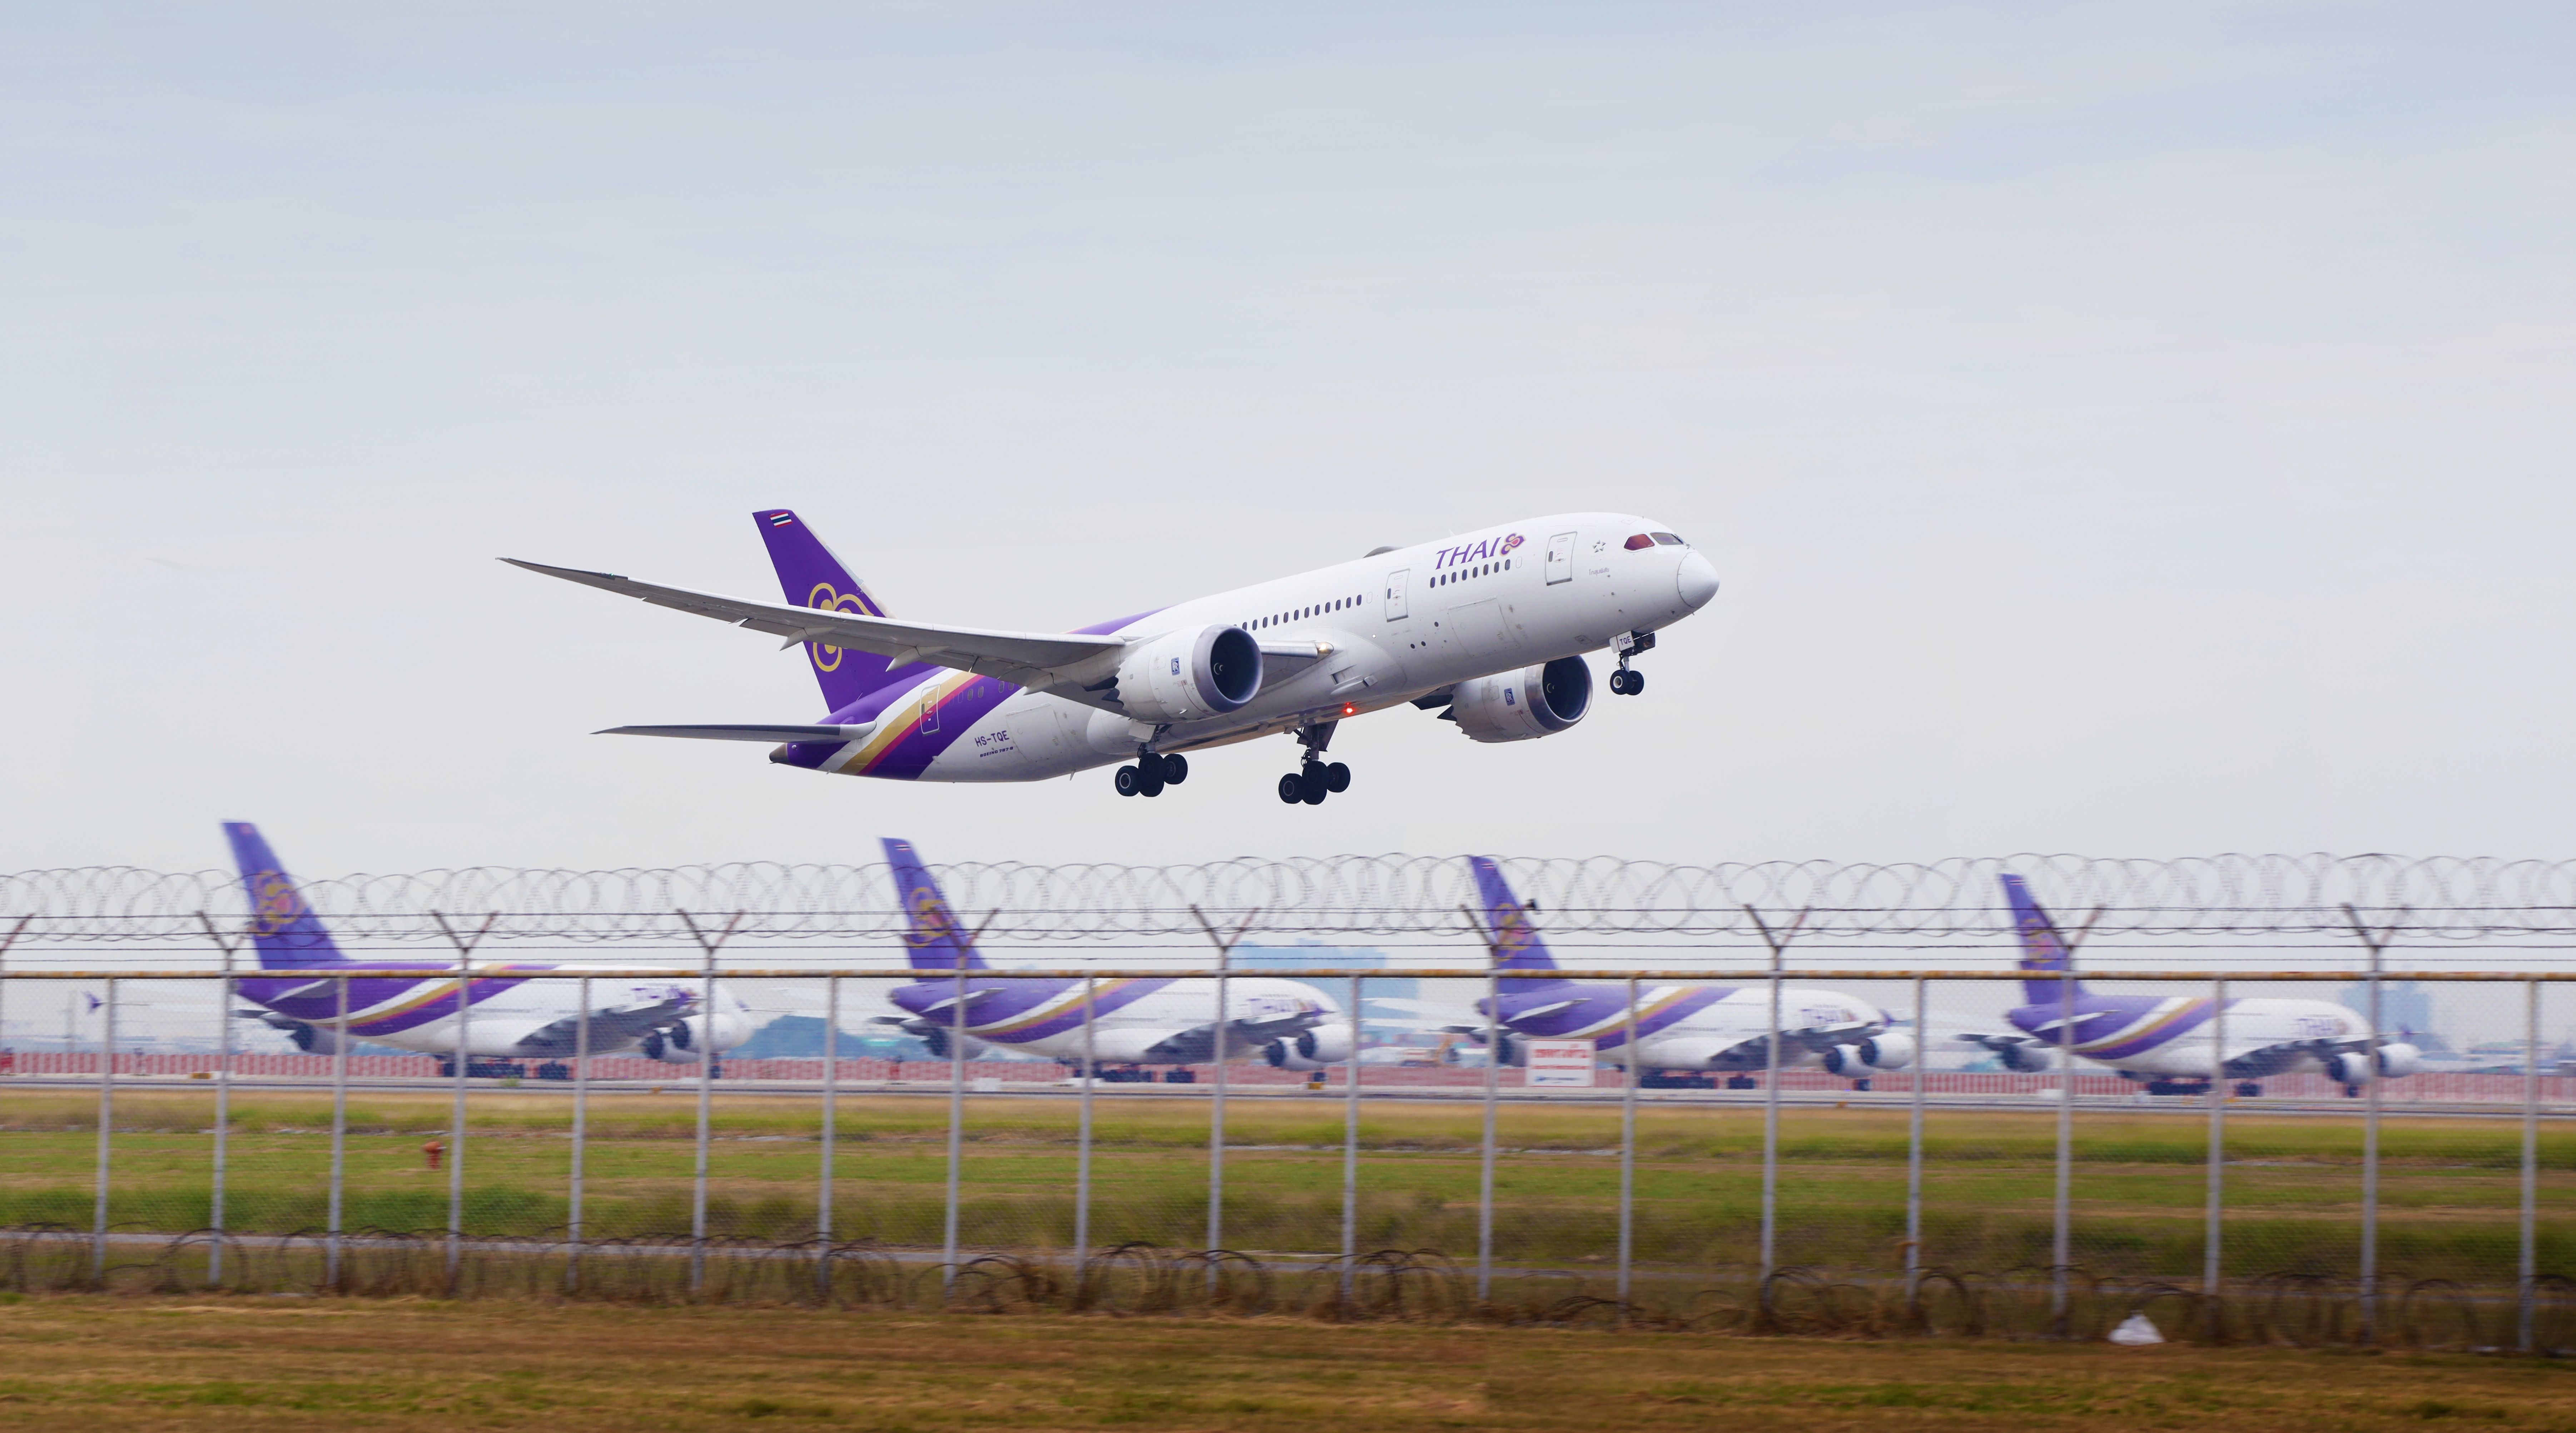 A Thai Airways Boeing 787 taking off from Bangkok Suvarnabhumi International Airport in front of parked Airbus A380 superjumbos